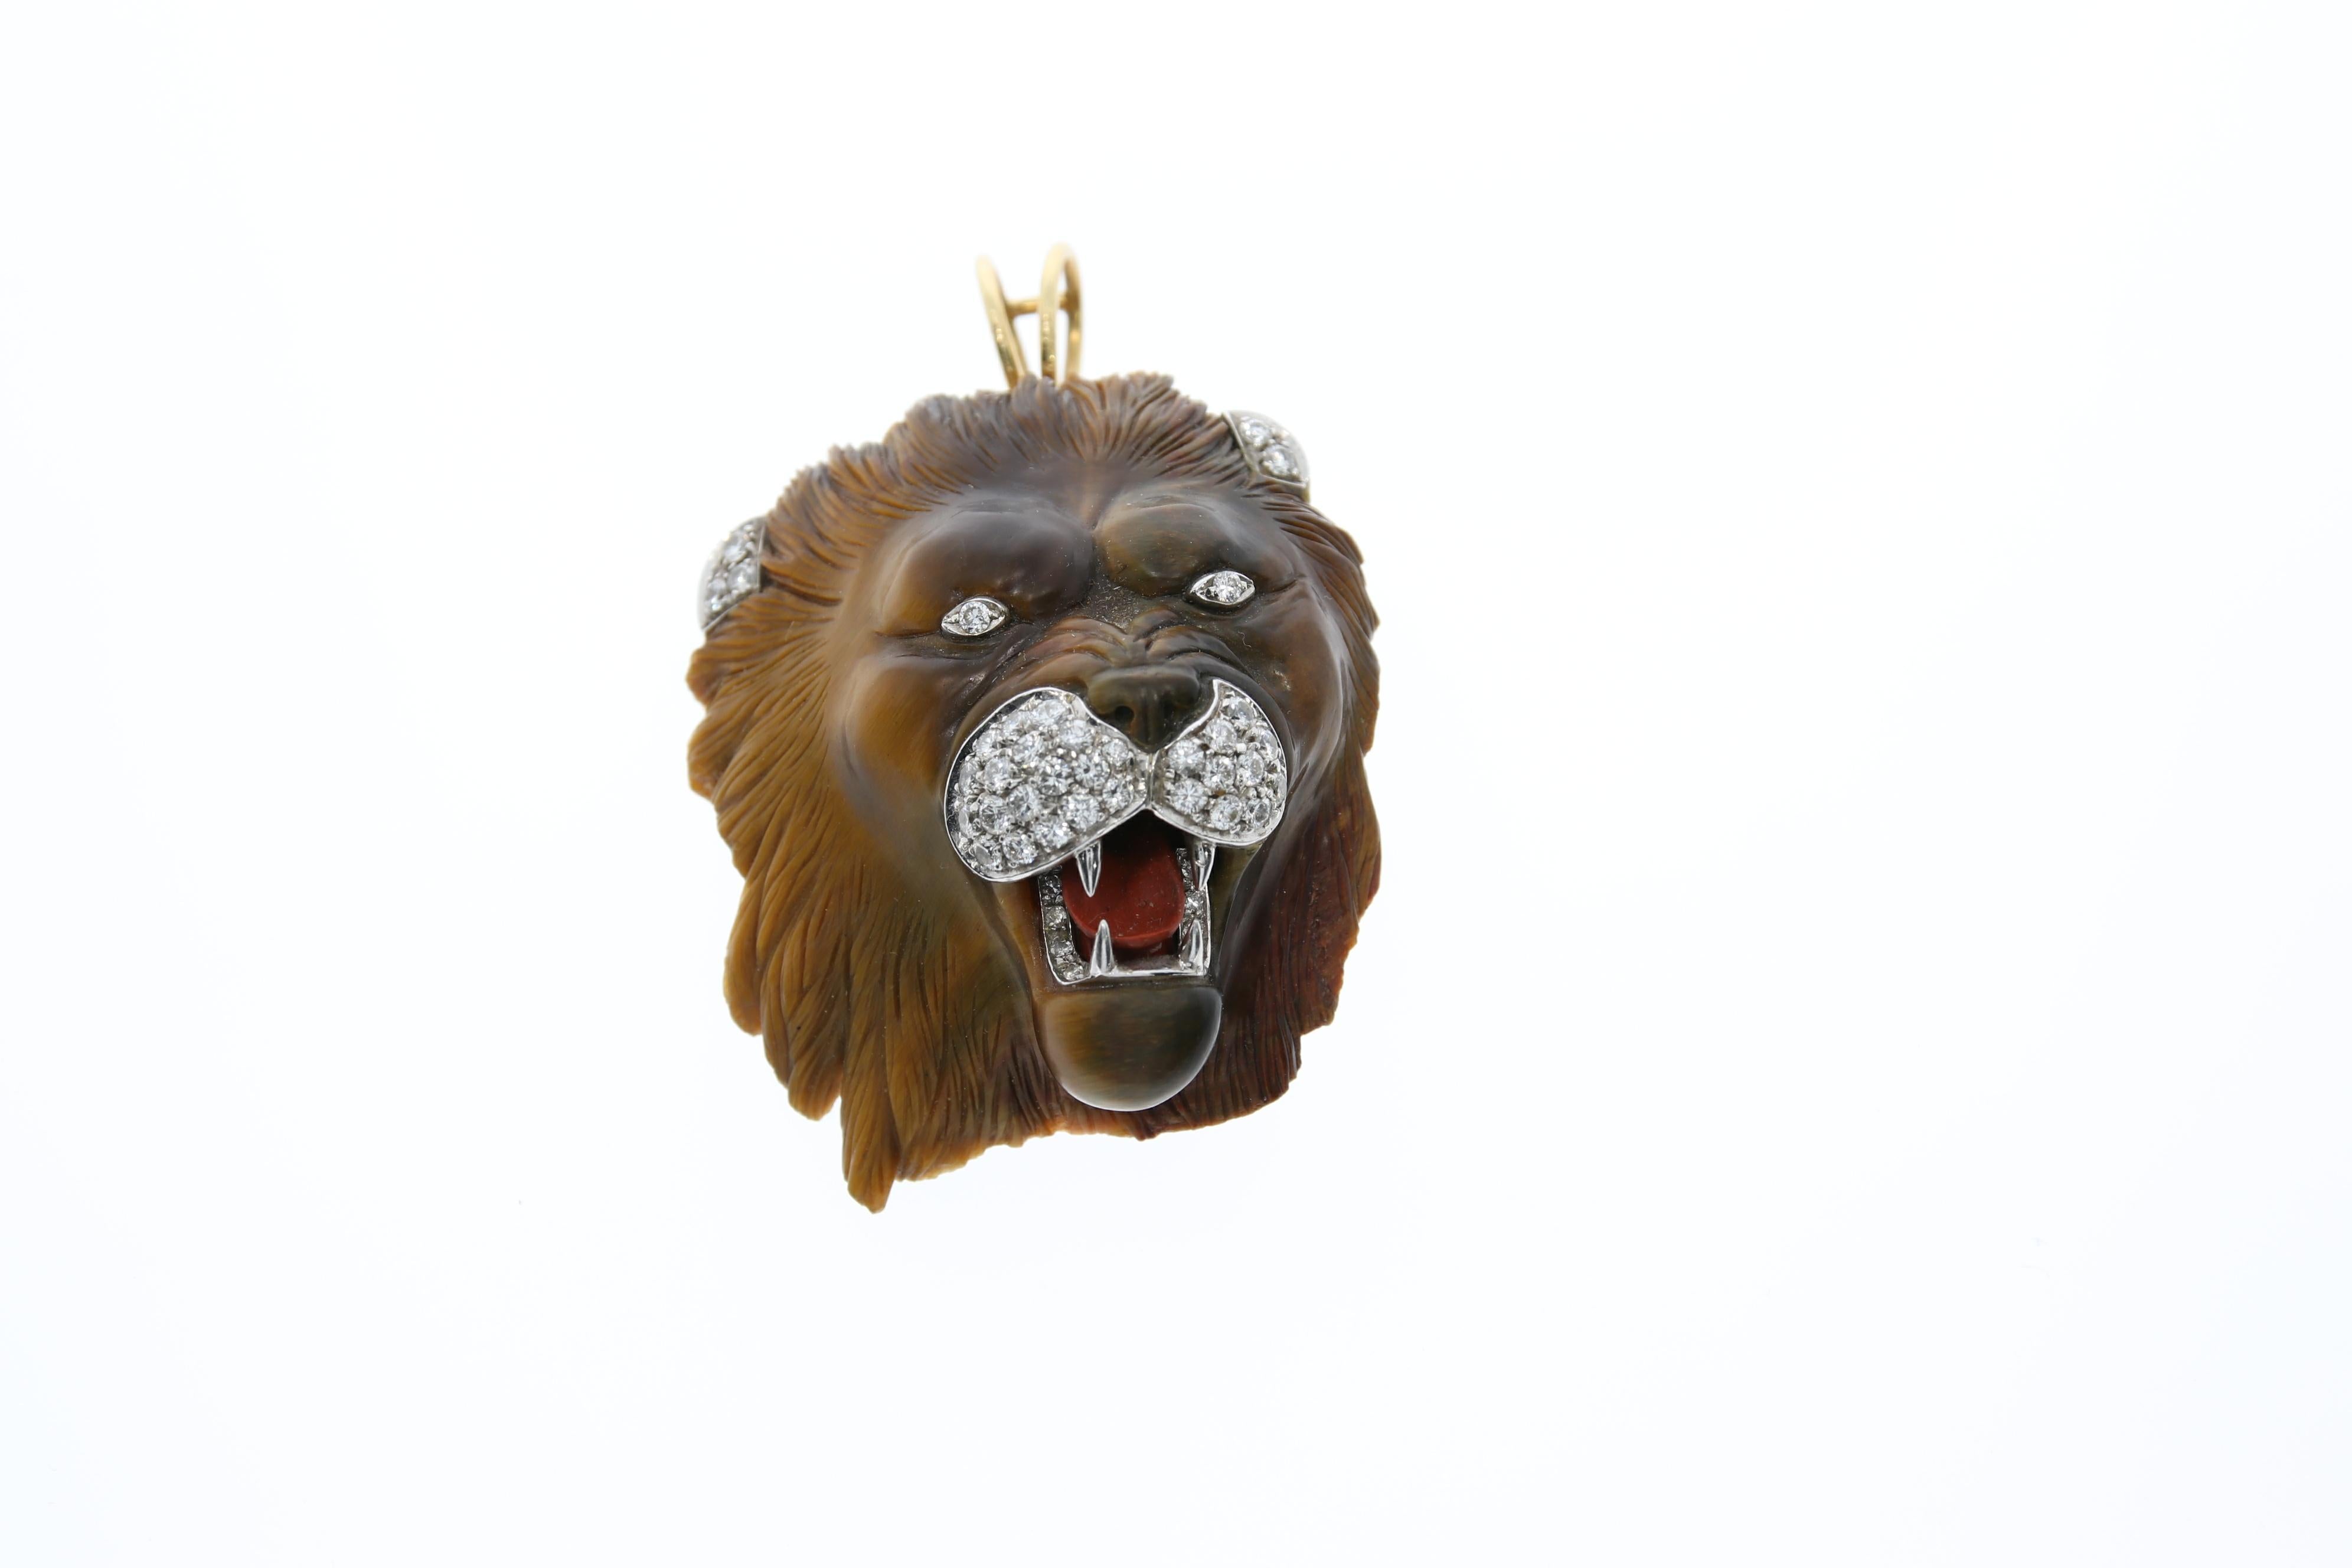 Impressive carved Lion Head Pendant or Brooch clip. It is made of tiger's eye stone in a beautiful color change from gold to dark brown. Eyes, ears and snout are made of Brilliants pavé set in platinum. 42 Brilliant with circa 1.30 ct. The tongue is